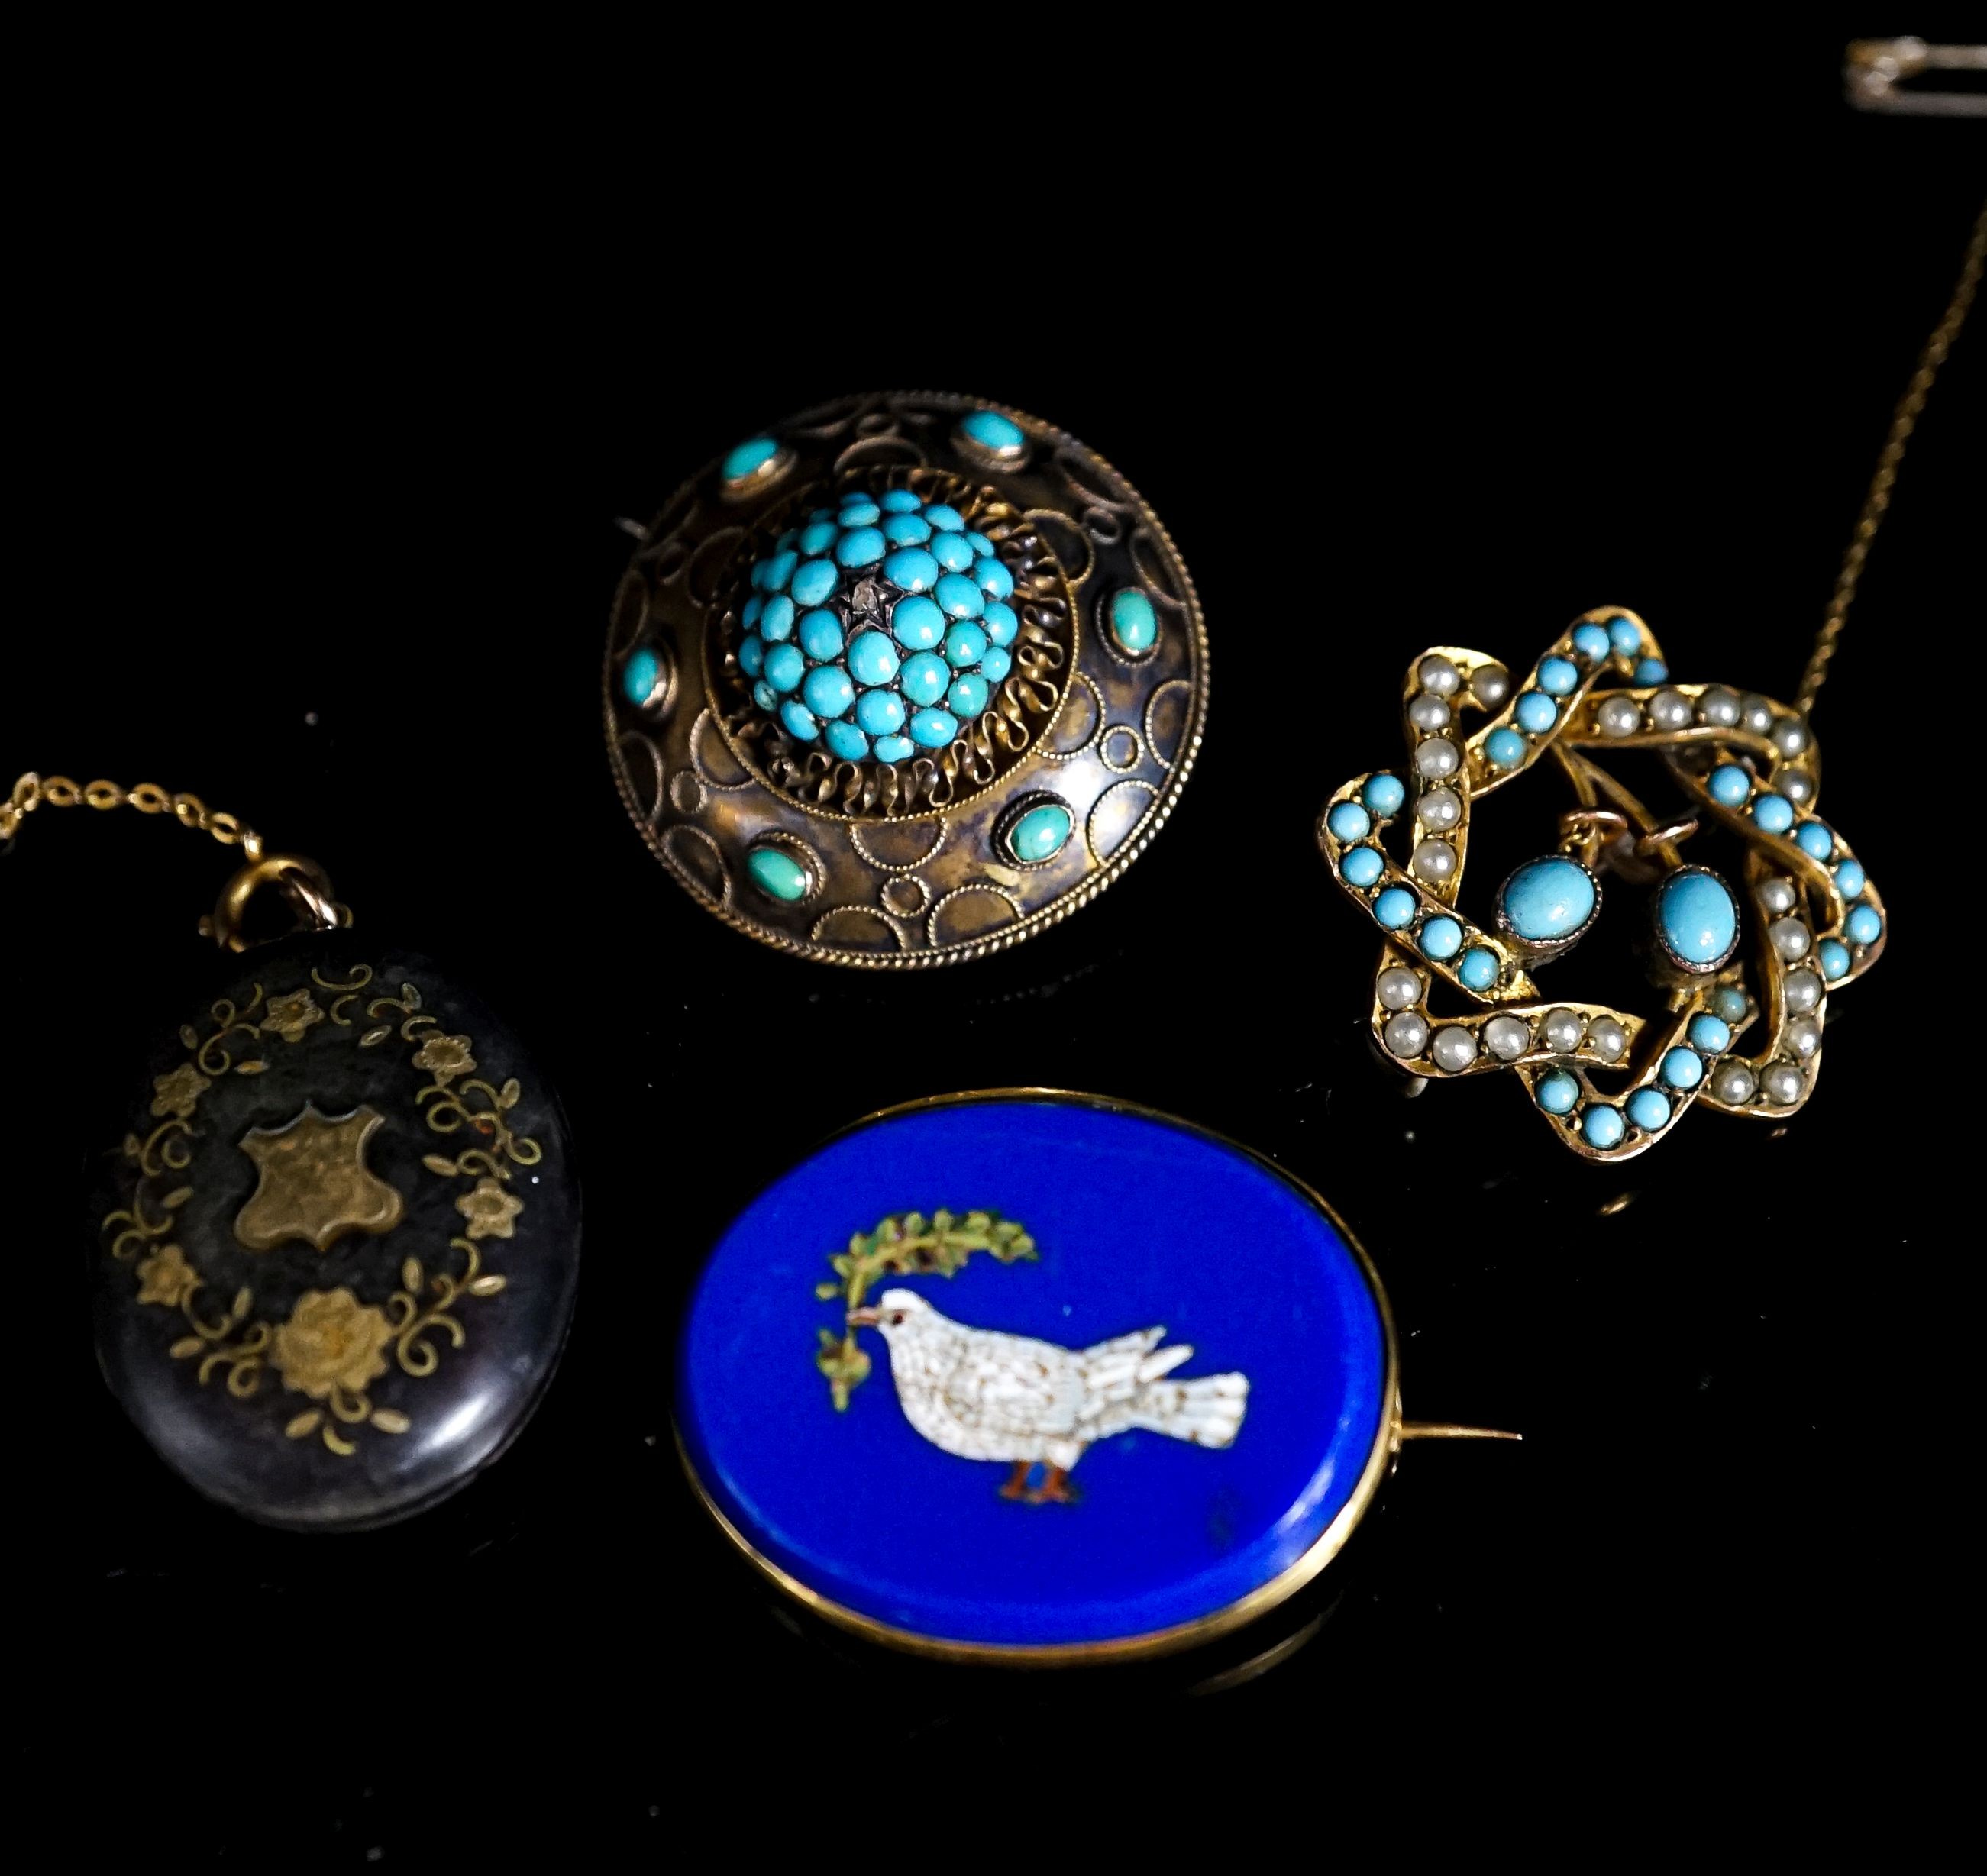 A yellow metal mounted micro mosaic oval brooch, 32mm, a Victorian mourning brooch, one other turquoise and split pearl brooch and a tortoiseshell pique locket on chain.